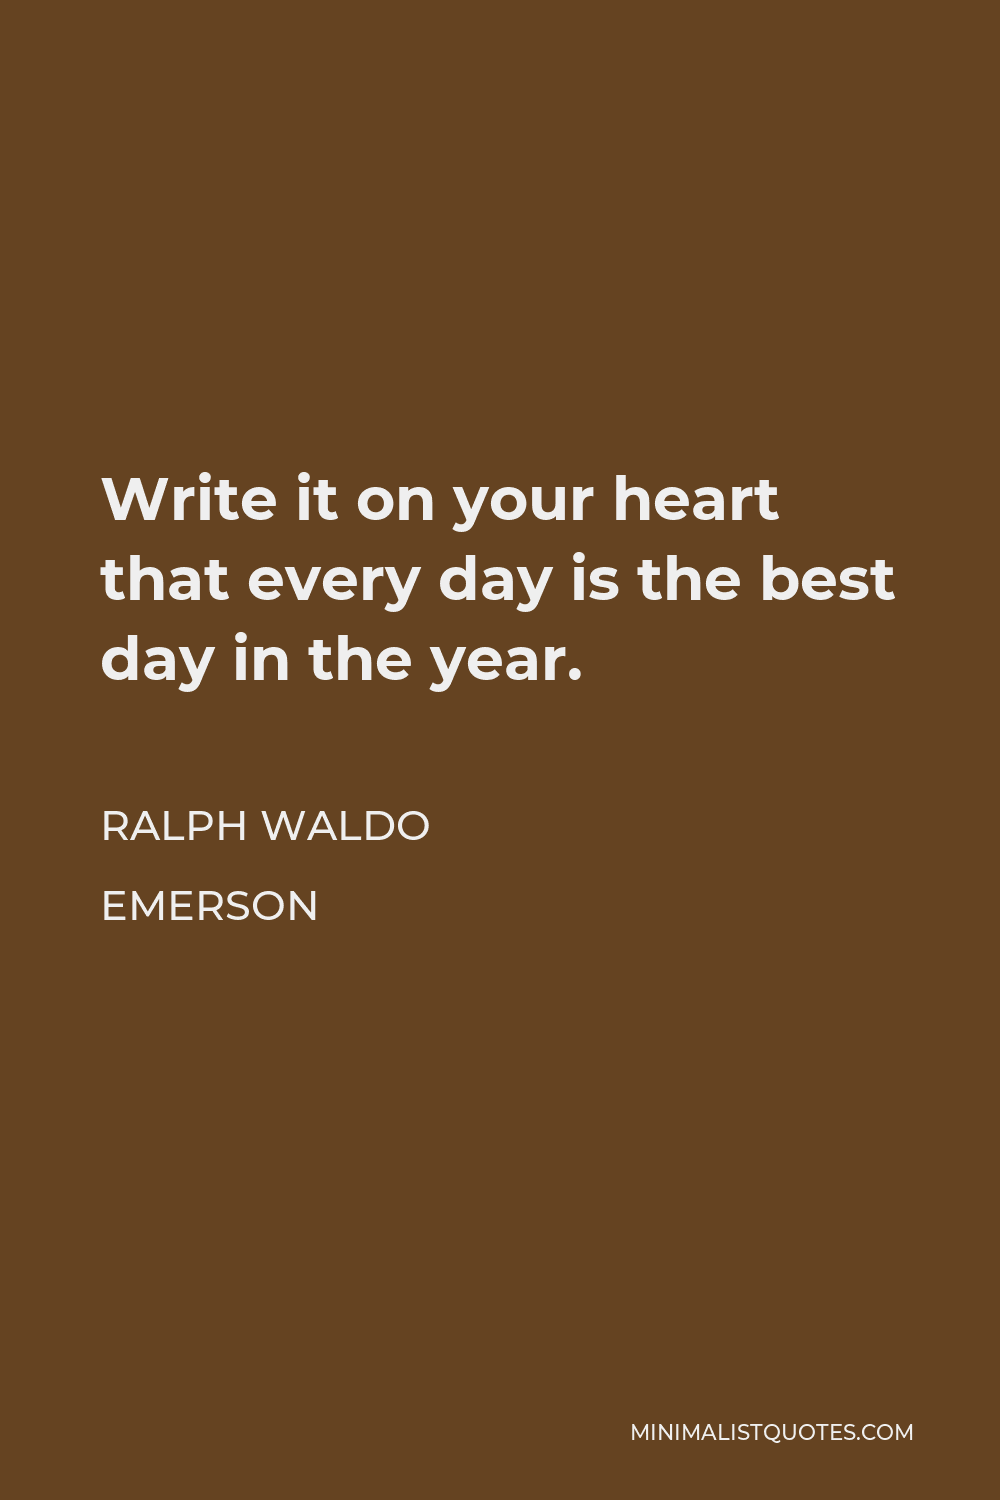 Ralph Waldo Emerson Quote - Write it on your heart that every day is the best day in the year.